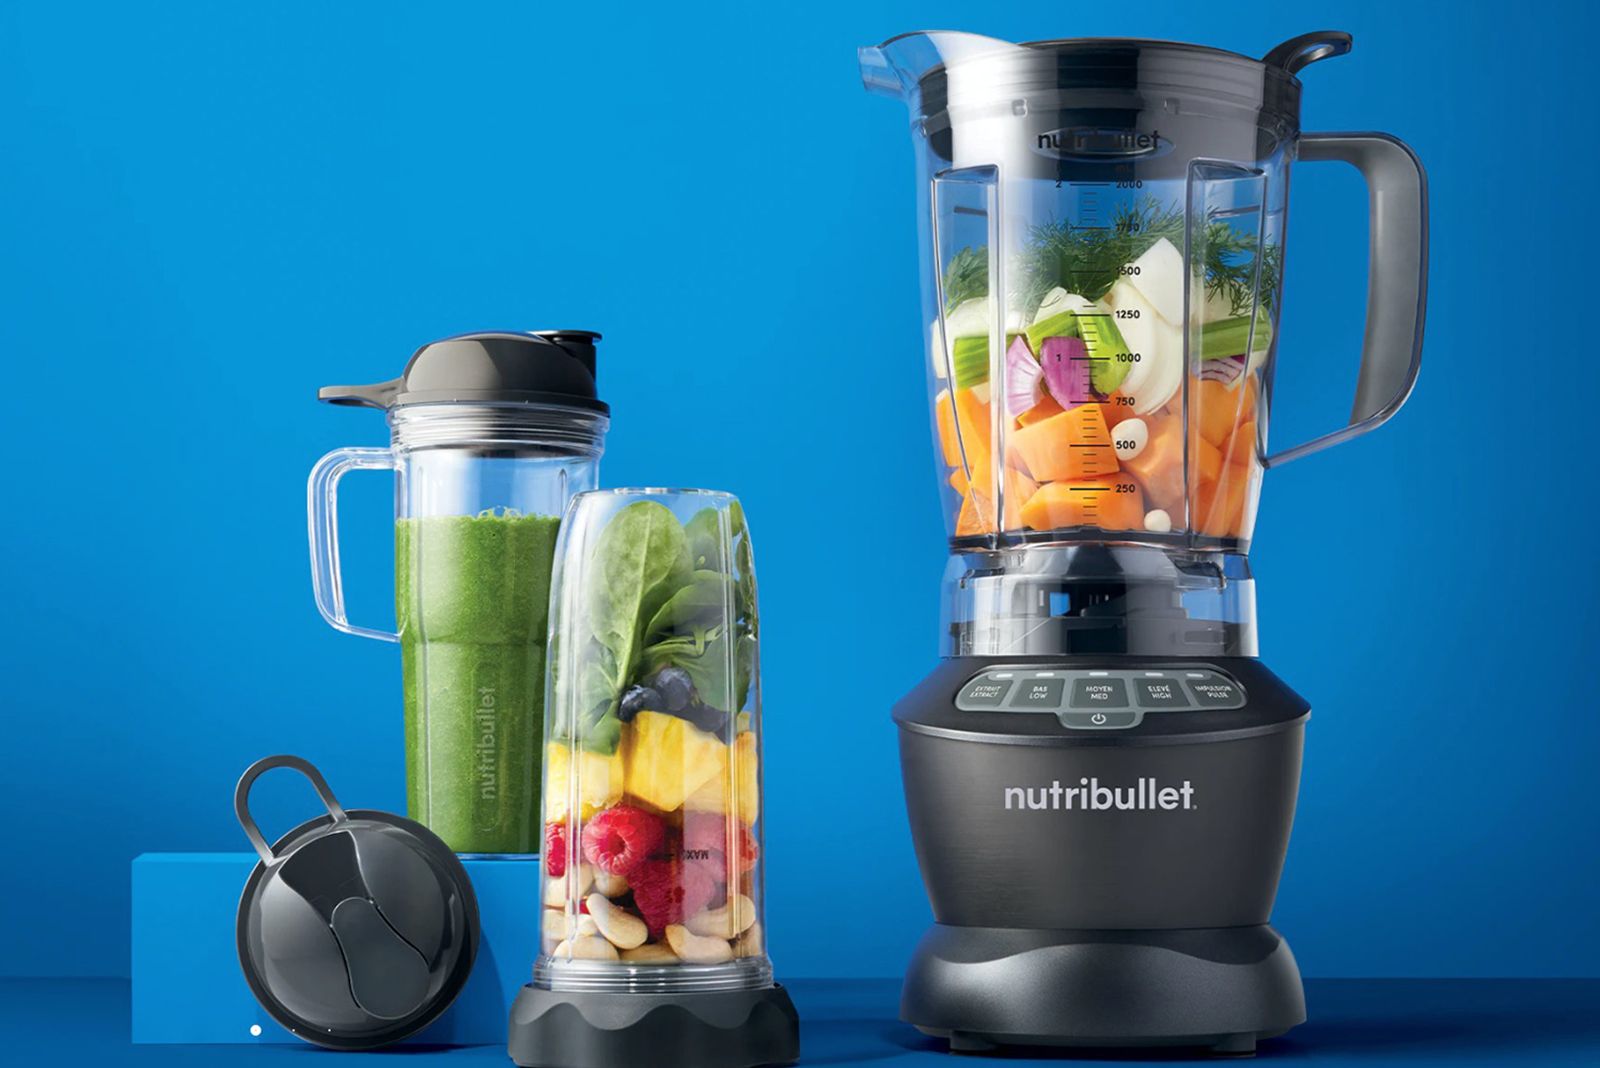 Best Nutribullet 2020 Pro Select Balance Rx Baby And More image 1